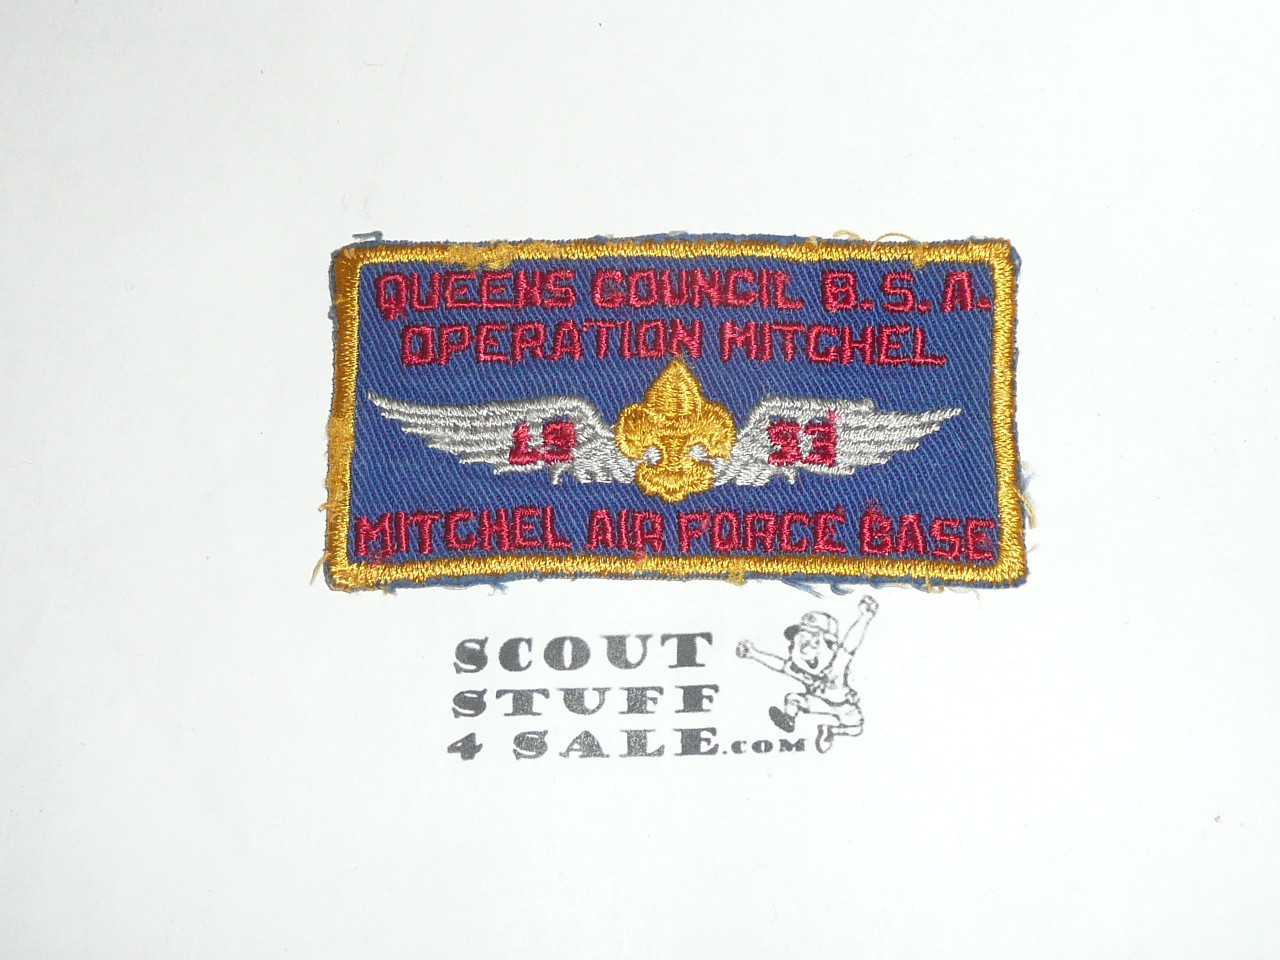 1953 Operation Mitchell Explorer Fly-in Patch, Queens Council, sewn